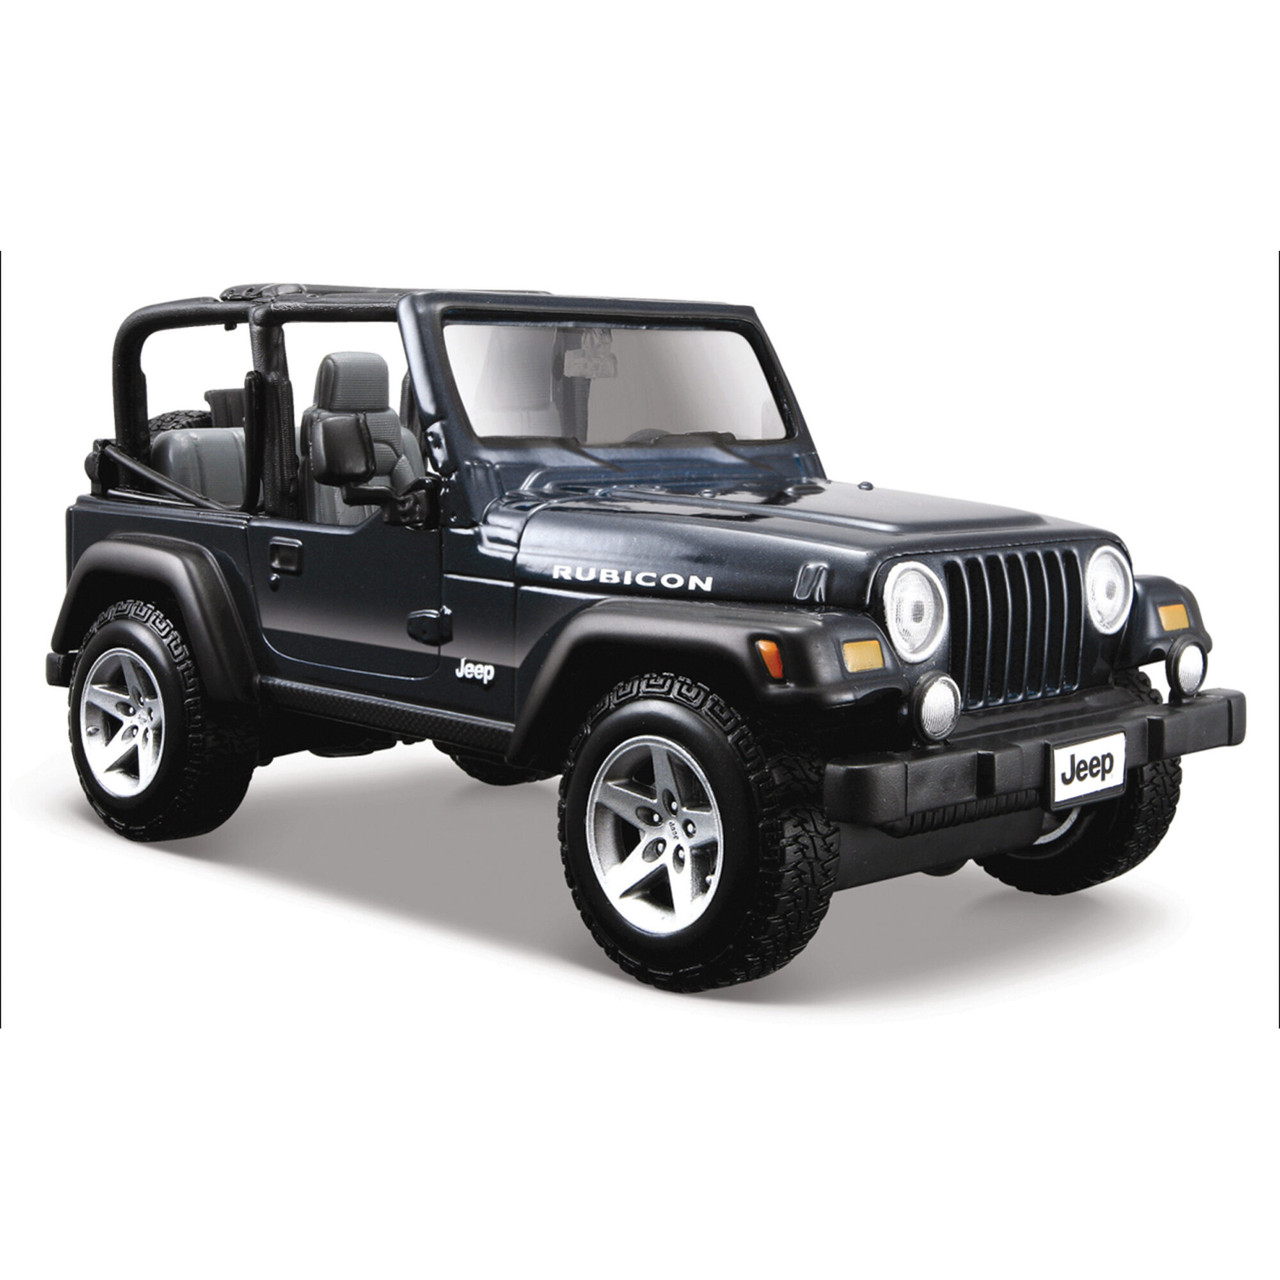 Jeep Wrangler Rubicon - Blue 1:27 Scale Diecast Model by Maisto | Fairfield  Collectibles - The #1 Source For High Quality Diecast Scale Model Cars